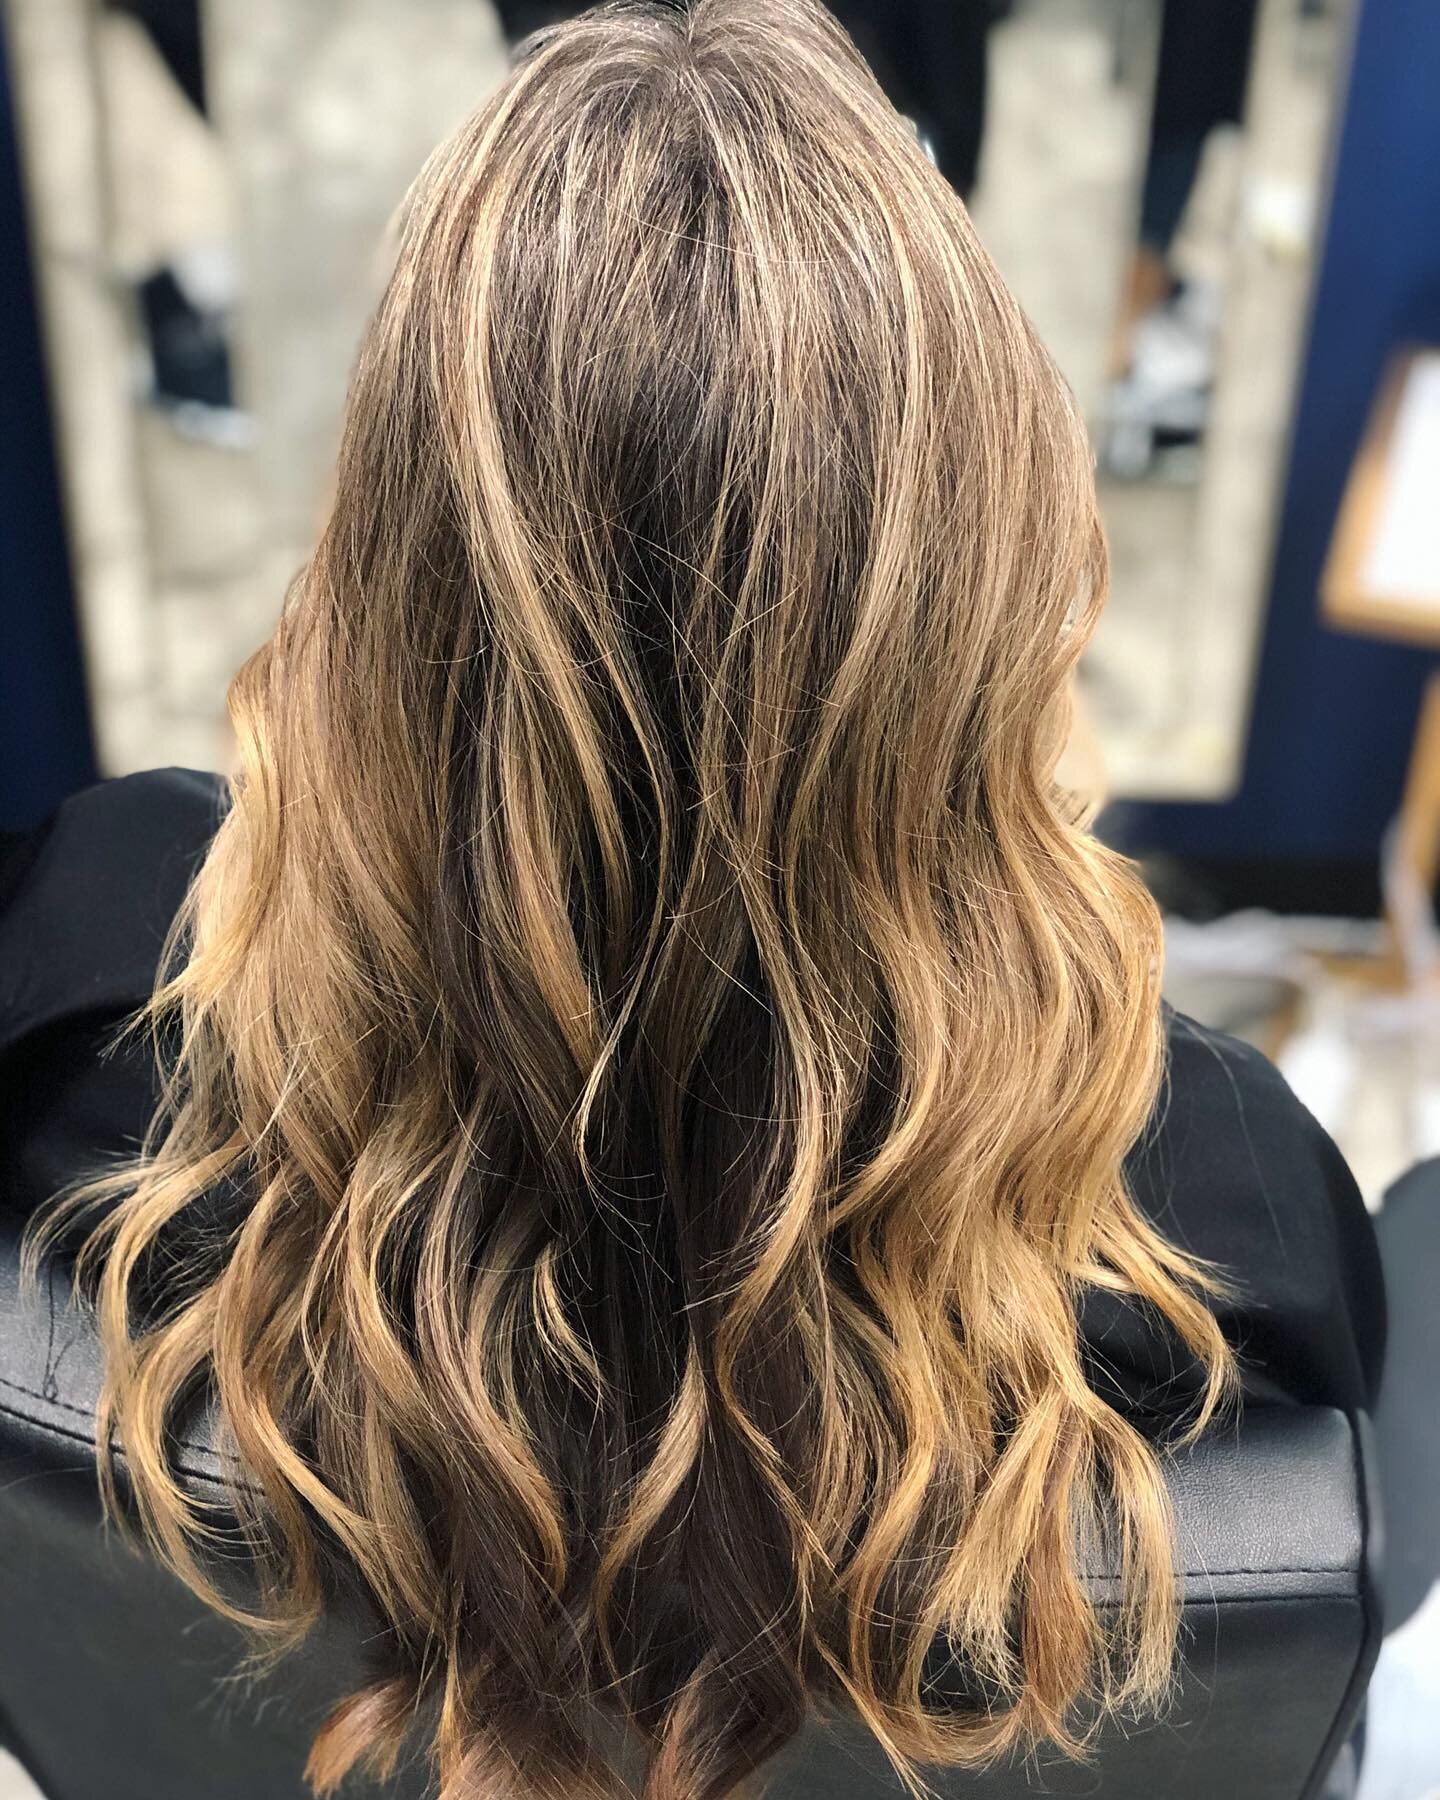 Honey blonde 🐝🐝 

I did Partial Hilights on my guest and add lowlights once in a while  for more dimension. 

#oneloudoun #ashburn #oneloudounhairstylist #ashburnsalon #highlights #honeyblonde #blonde